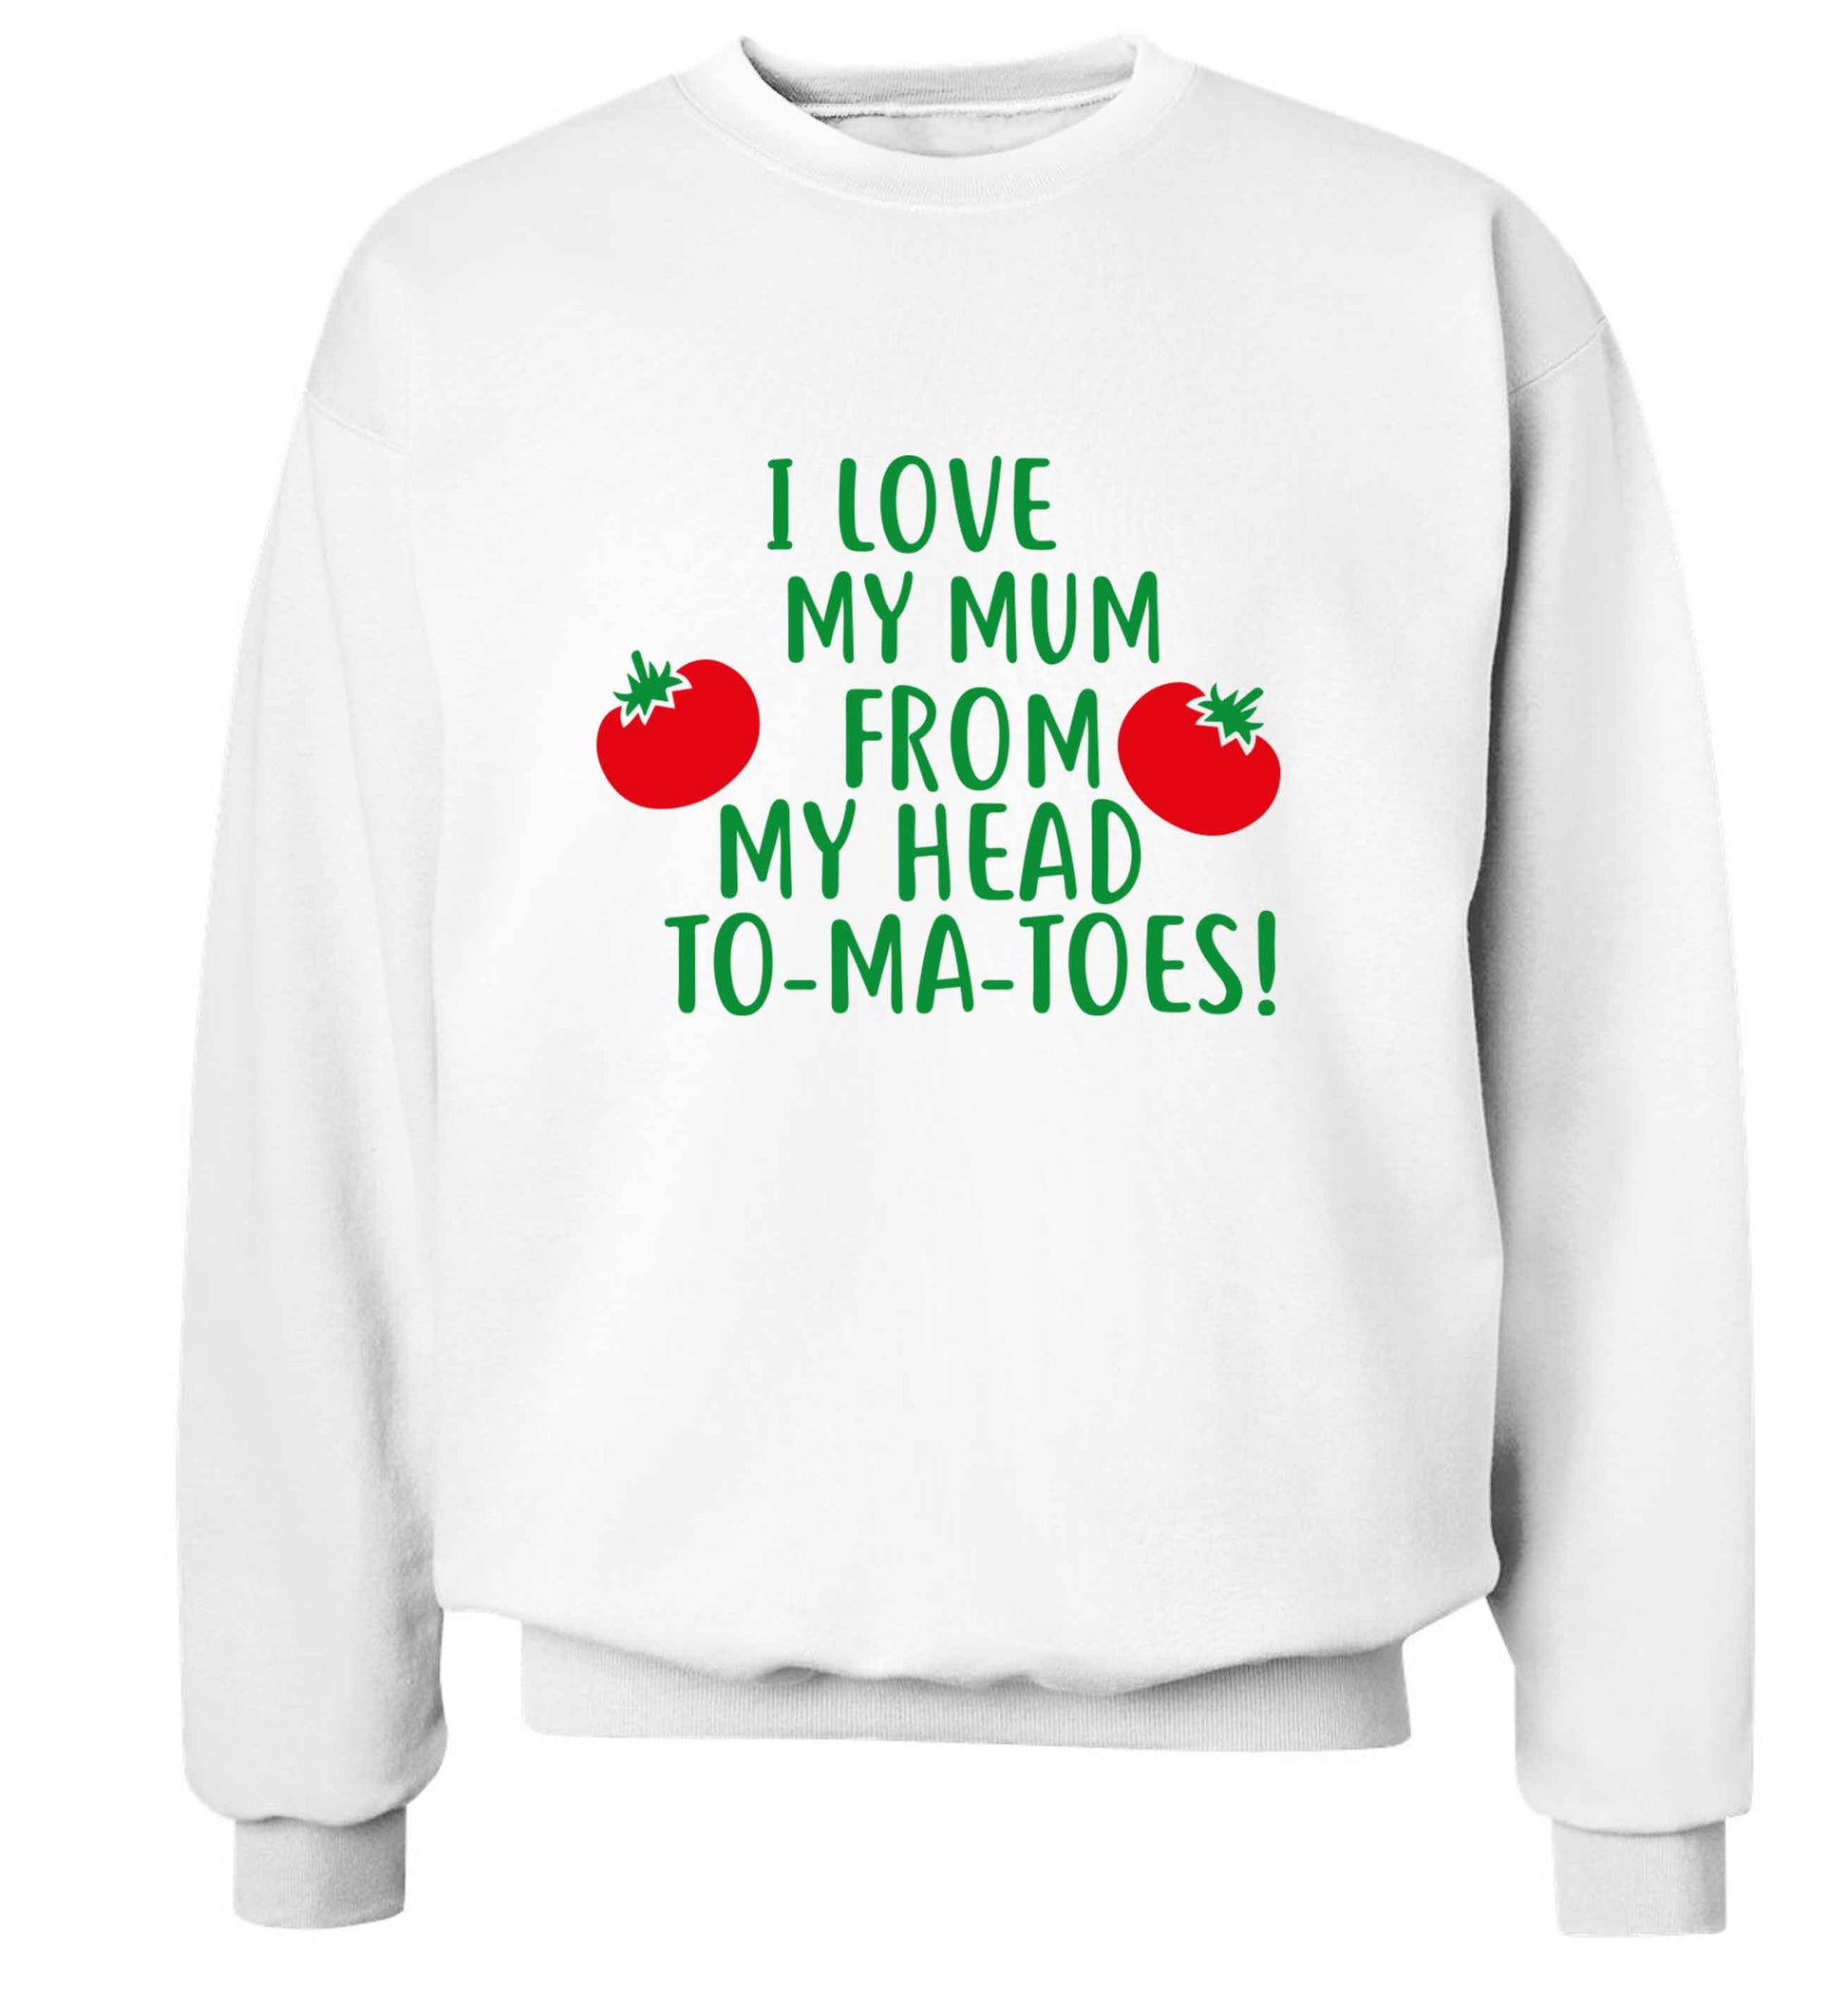 I love my mum from my head to-my-toes! adult's unisex white sweater 2XL